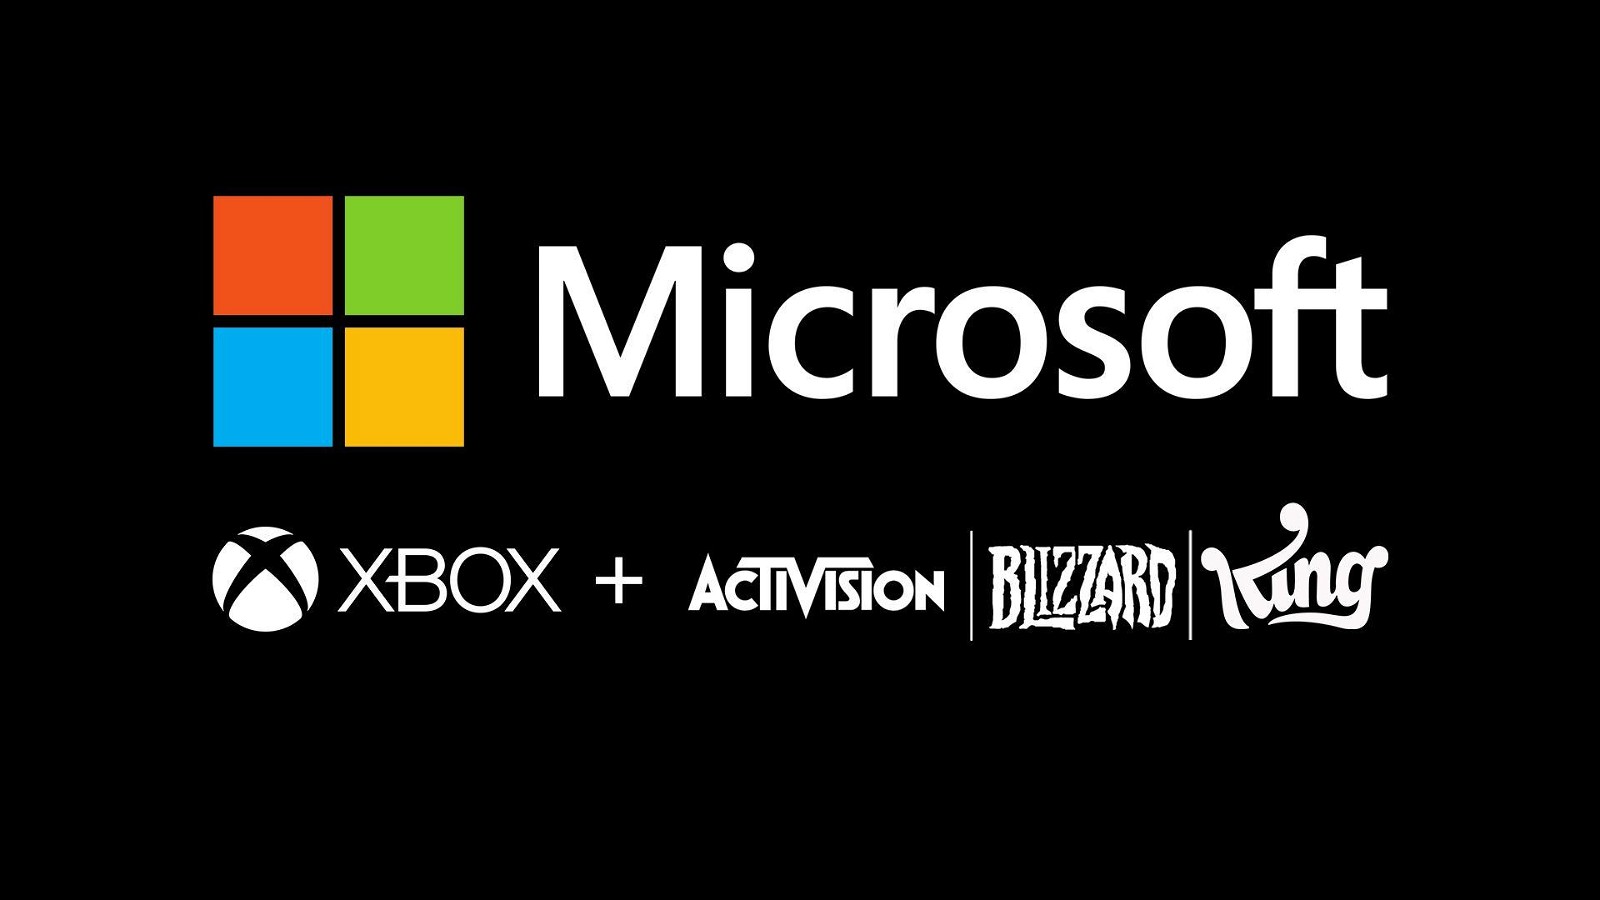 Microsoft acquired Activision, Blizzard Entertainment, and King 